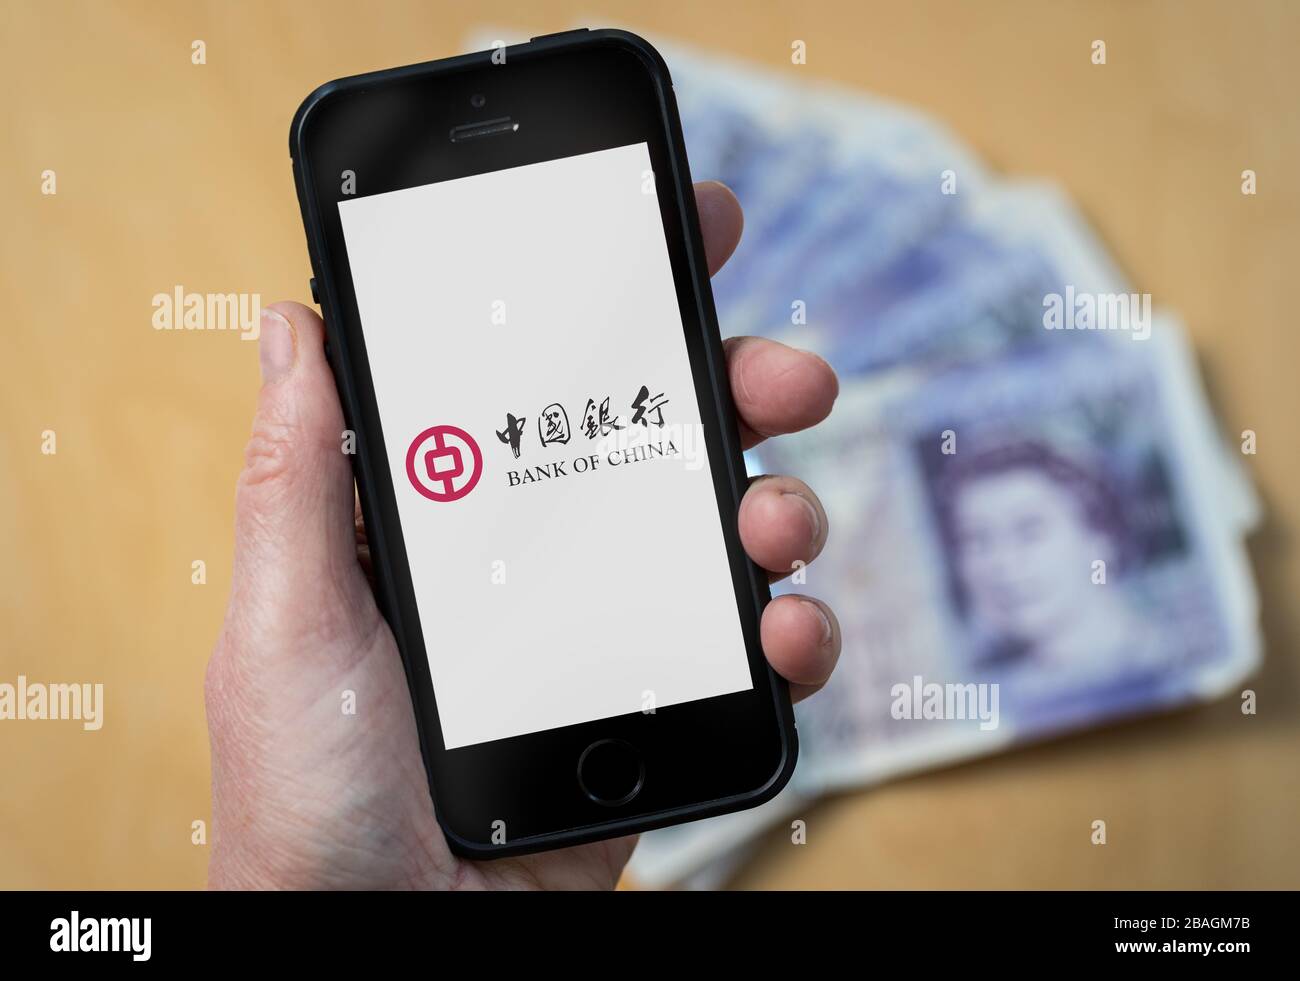 A woman looking at the Bank of China logo on a mobile phone. (editorial Use Only) Stock Photo